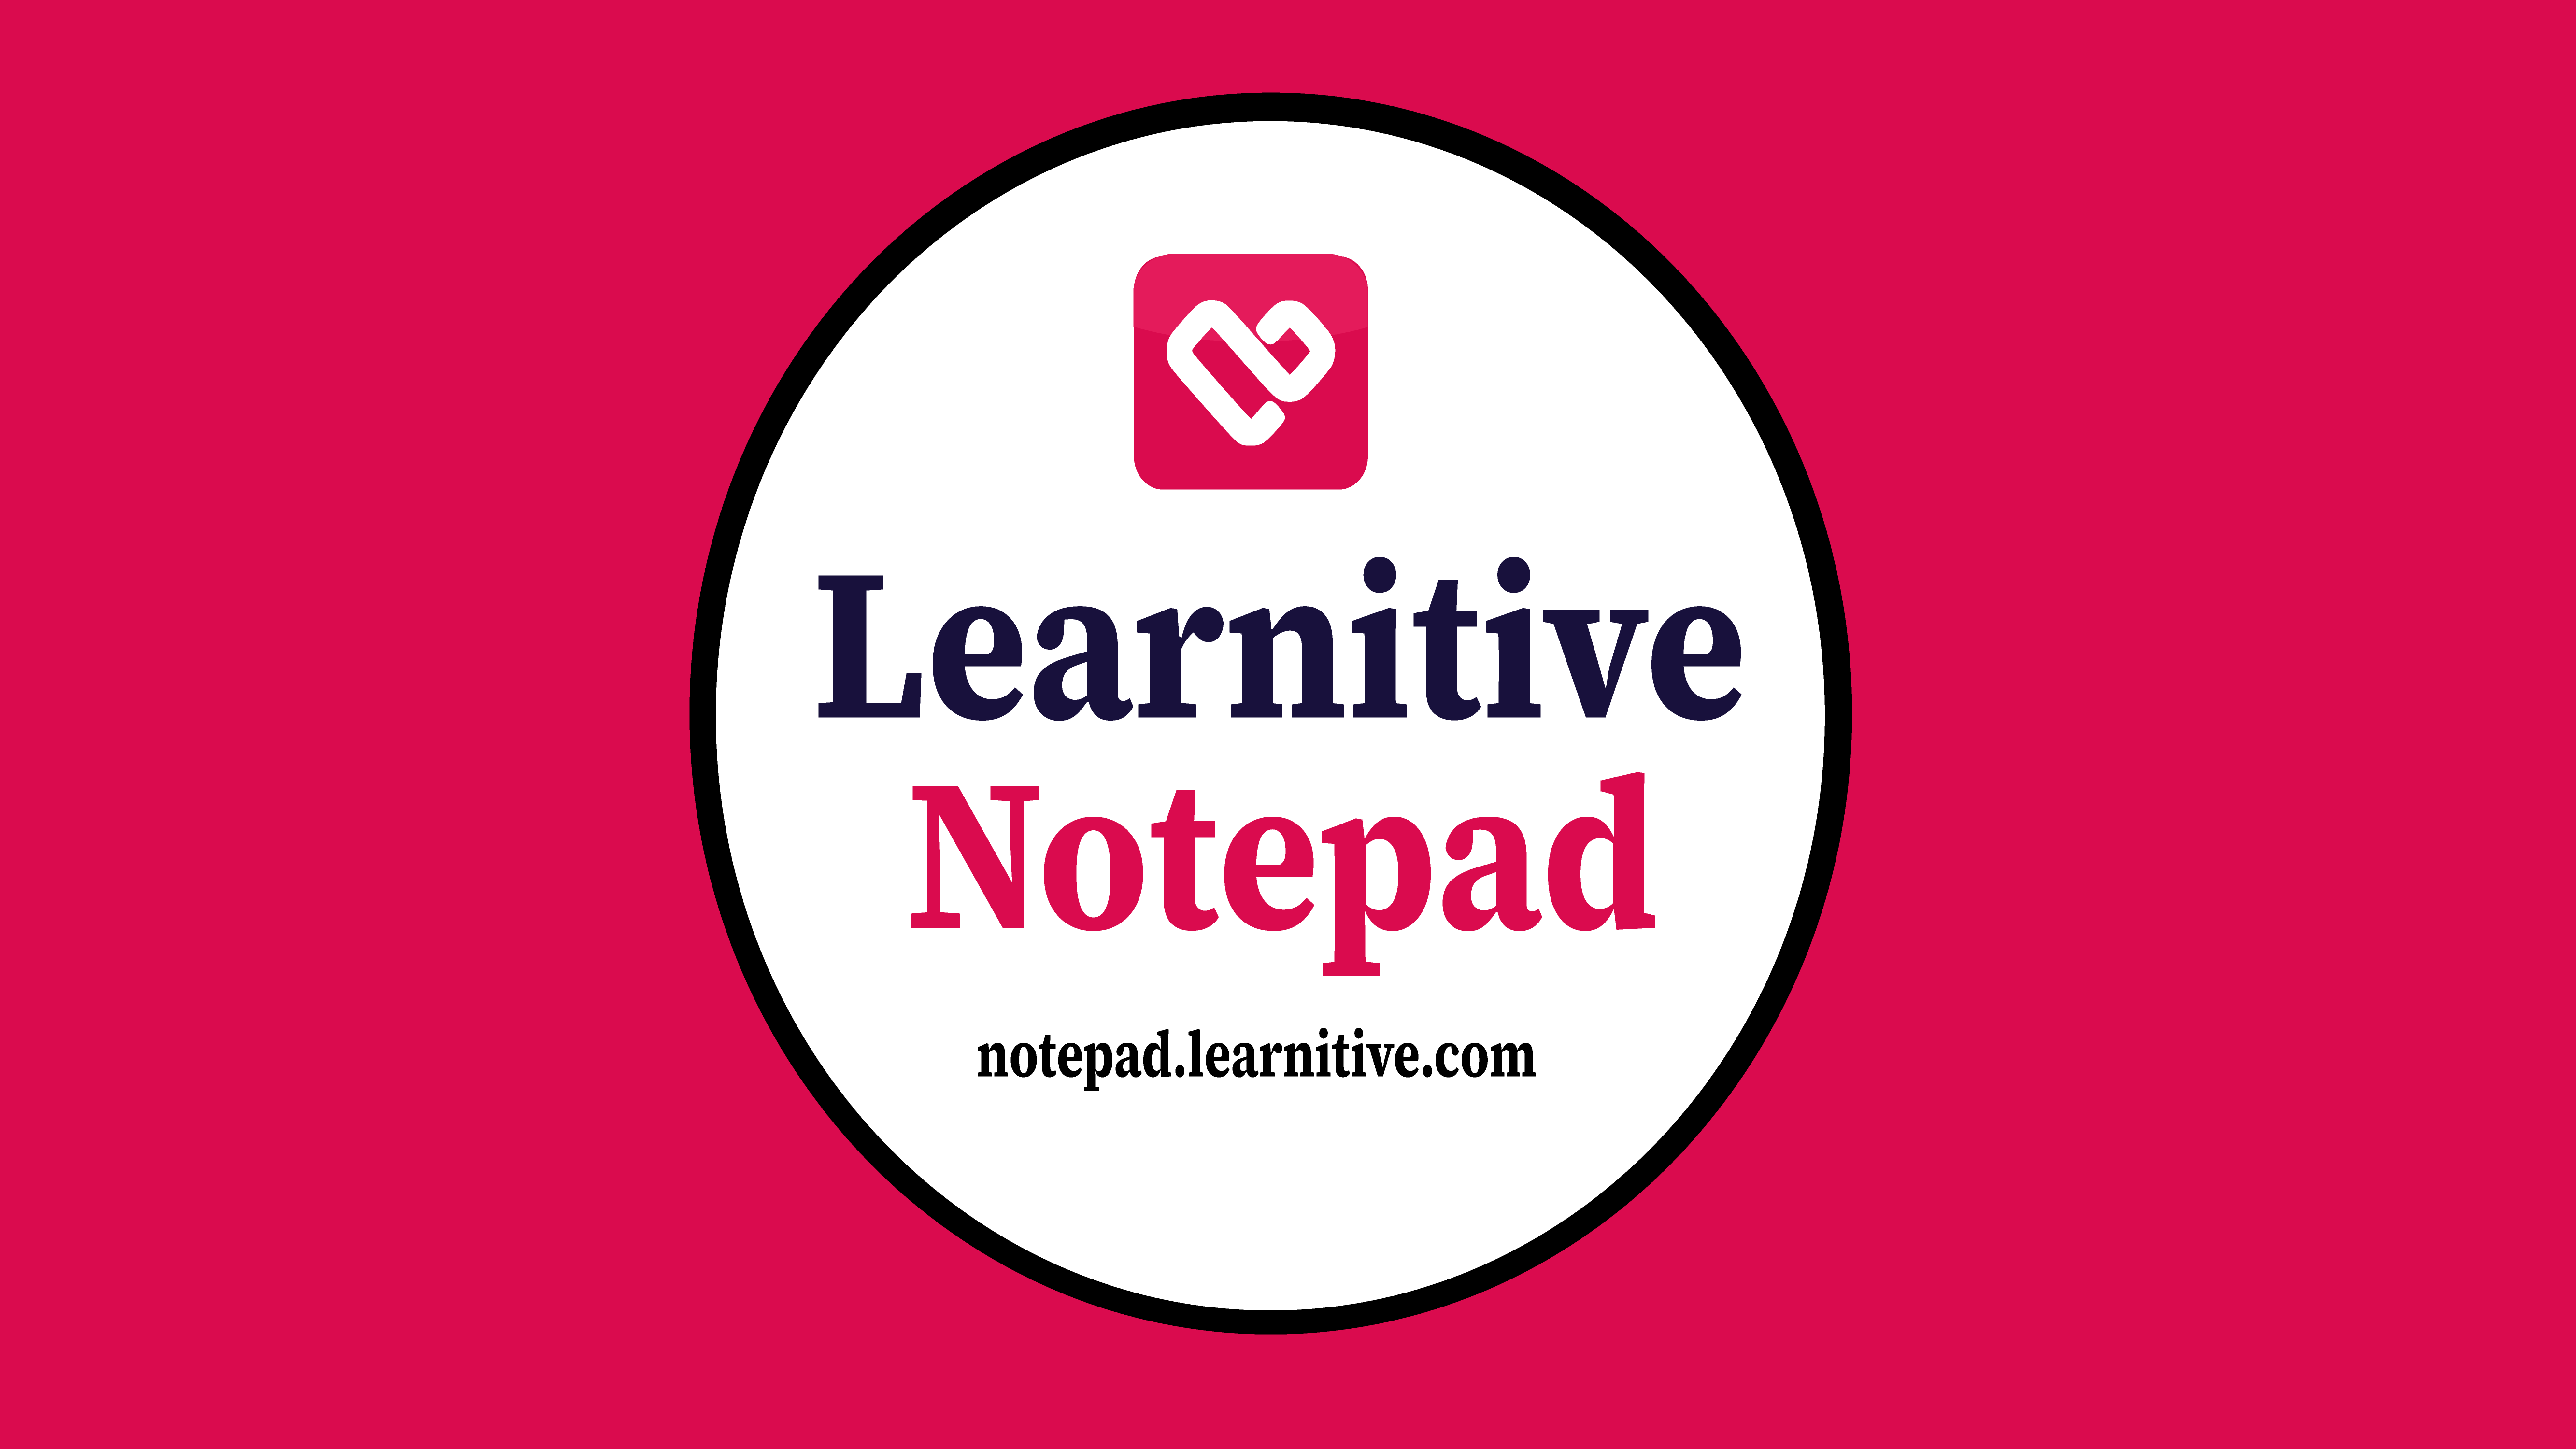 Learnitive Notepad - Your Evernote and Codepen alternative